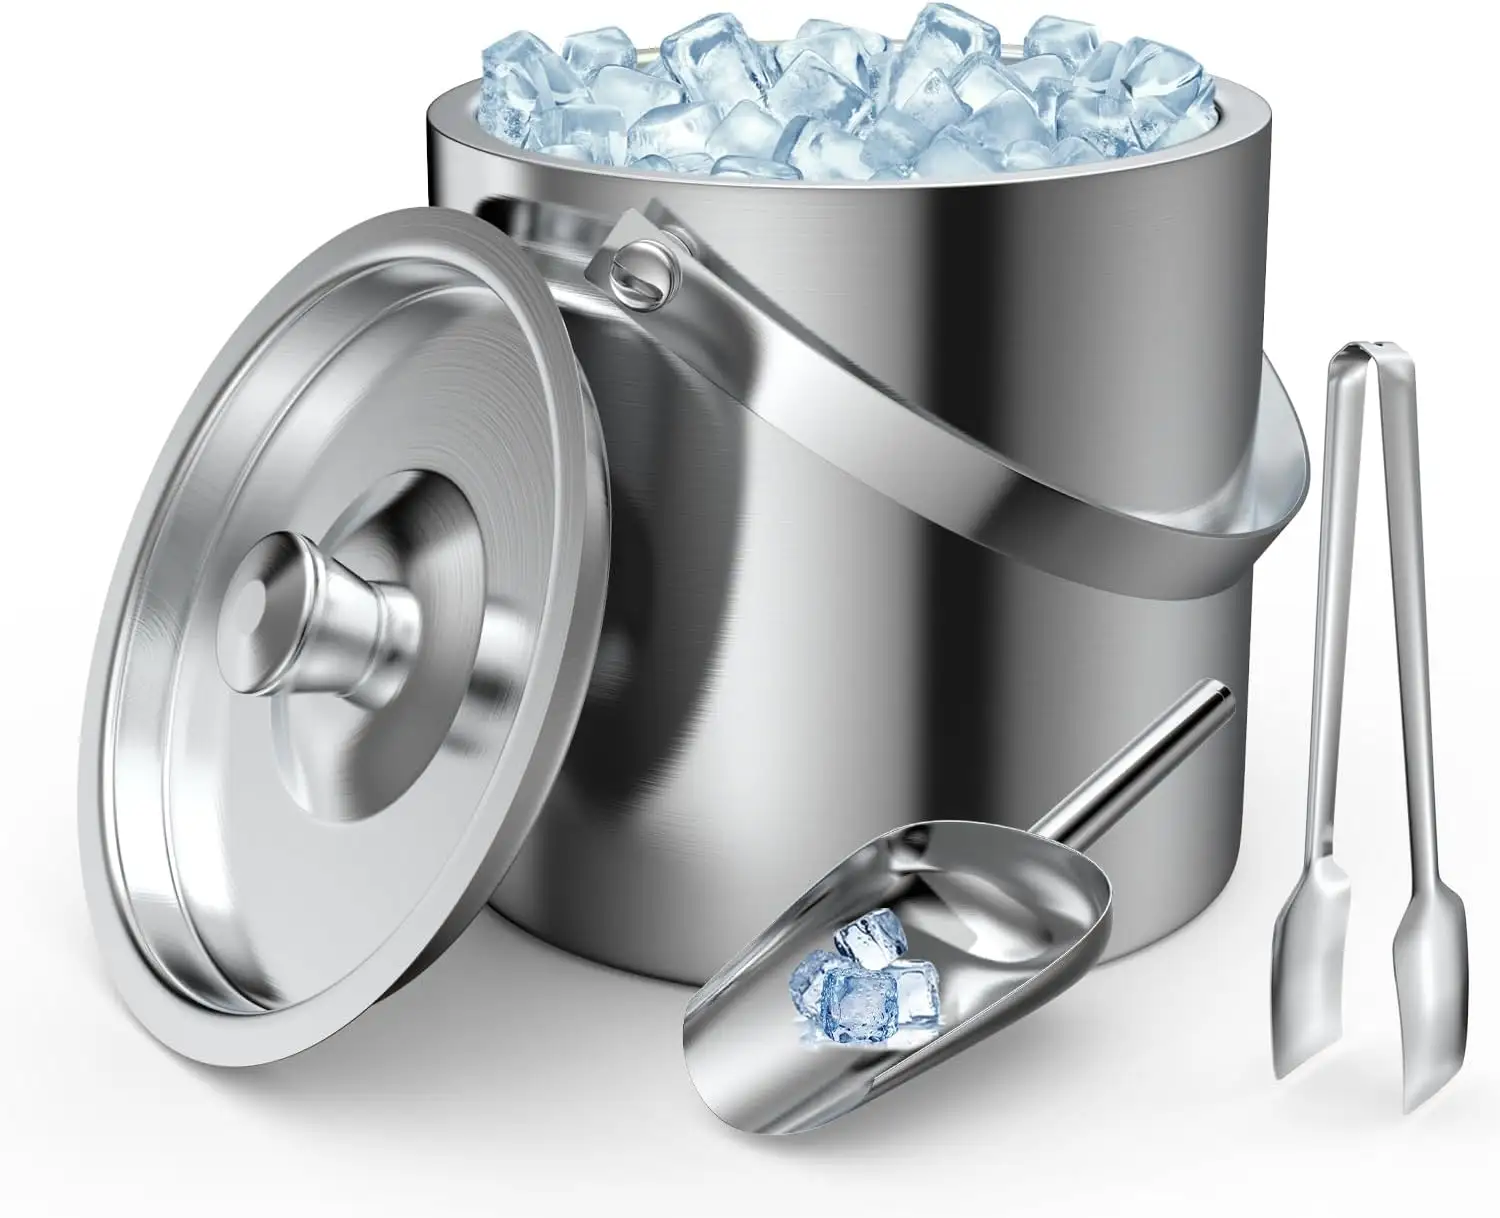 OEM Double-Wall 2L/3L Stainless Steel Insulated Chilling Ice Buckets , Coolers & Holders with Lid Tong Handle